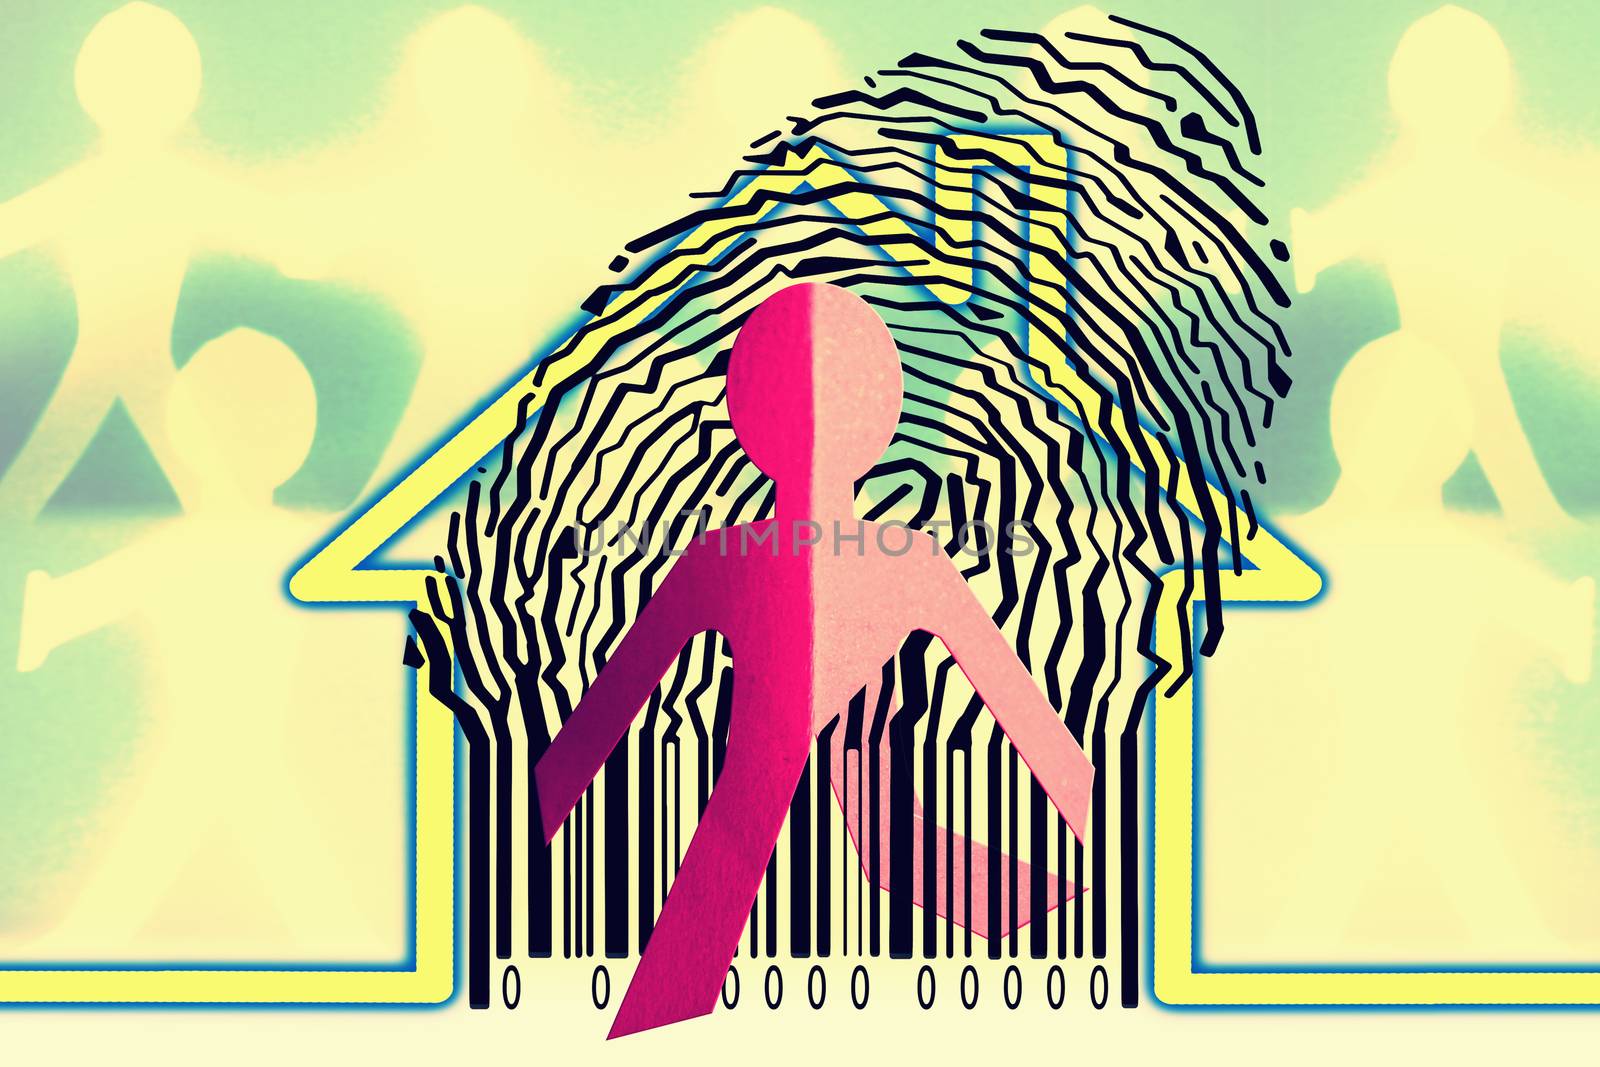 Paperman coming out of a bar code with Home Symbol by yands